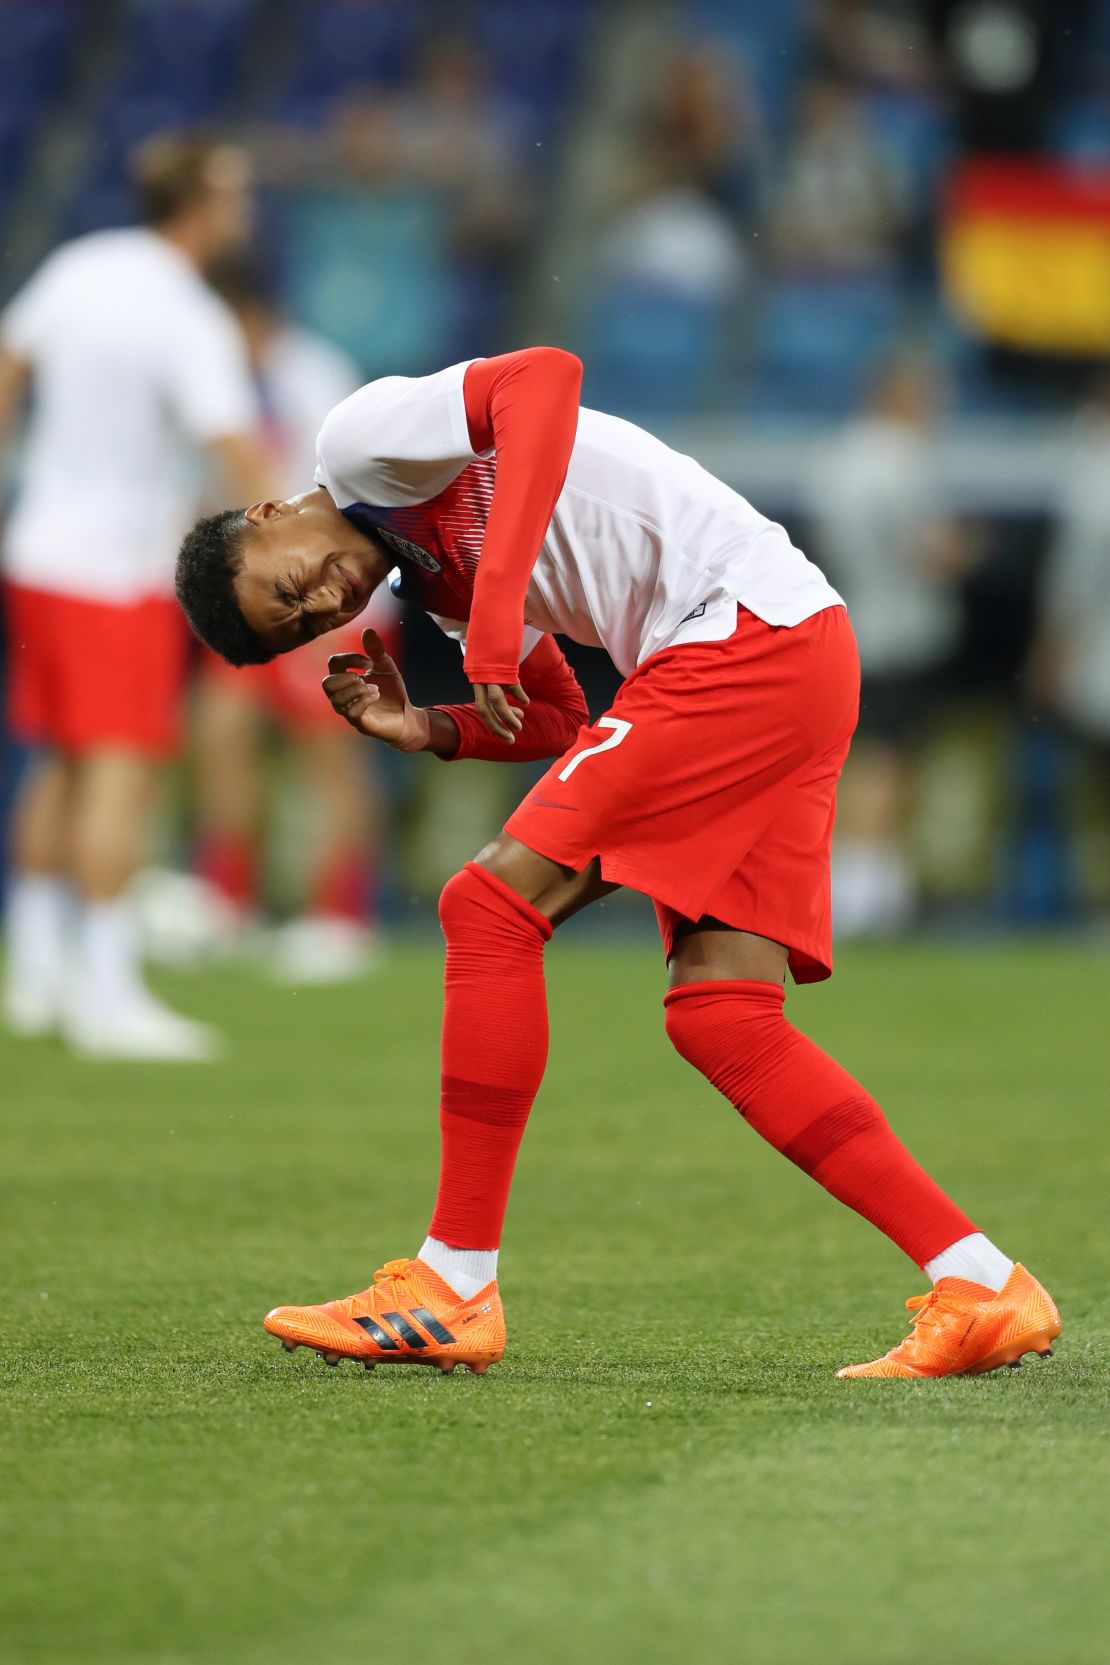 Jesse Lingard of England reacts after an insect lands on him ahead of the 2018 FIFA World Cup Russia group G match between Tunisia and England.